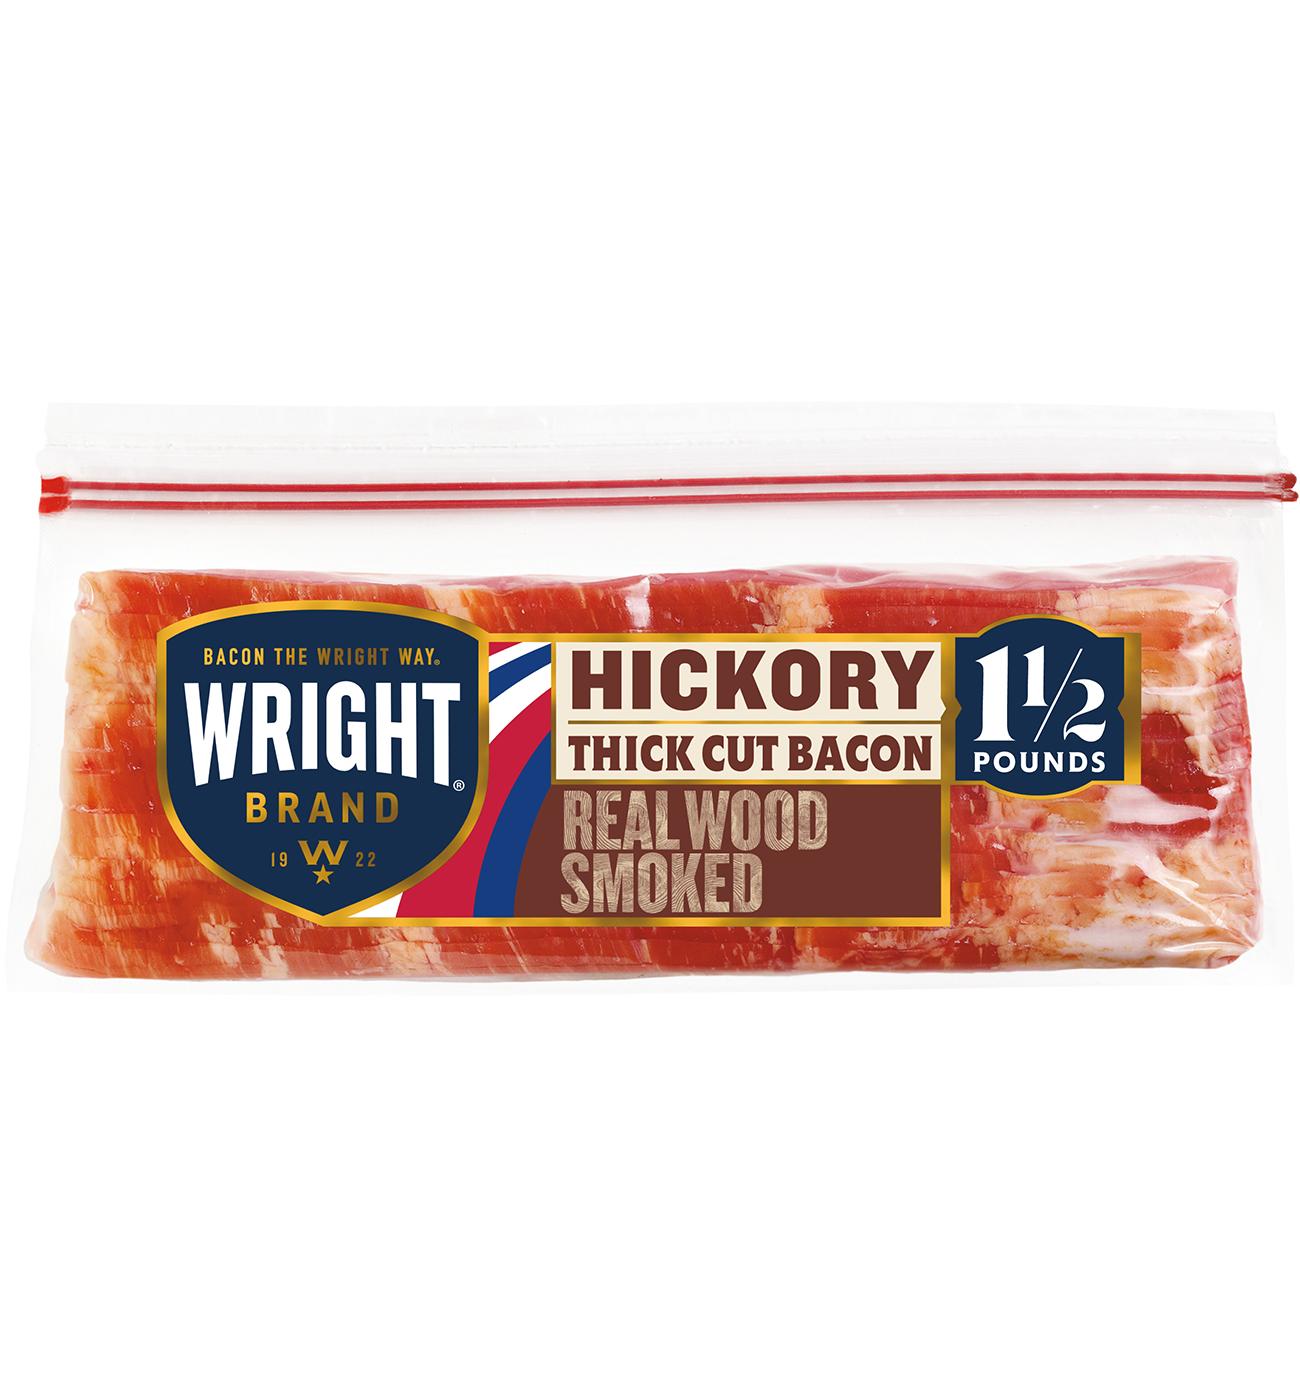 Wright Brand Hickory Smoked Thick Cut Bacon; image 1 of 6